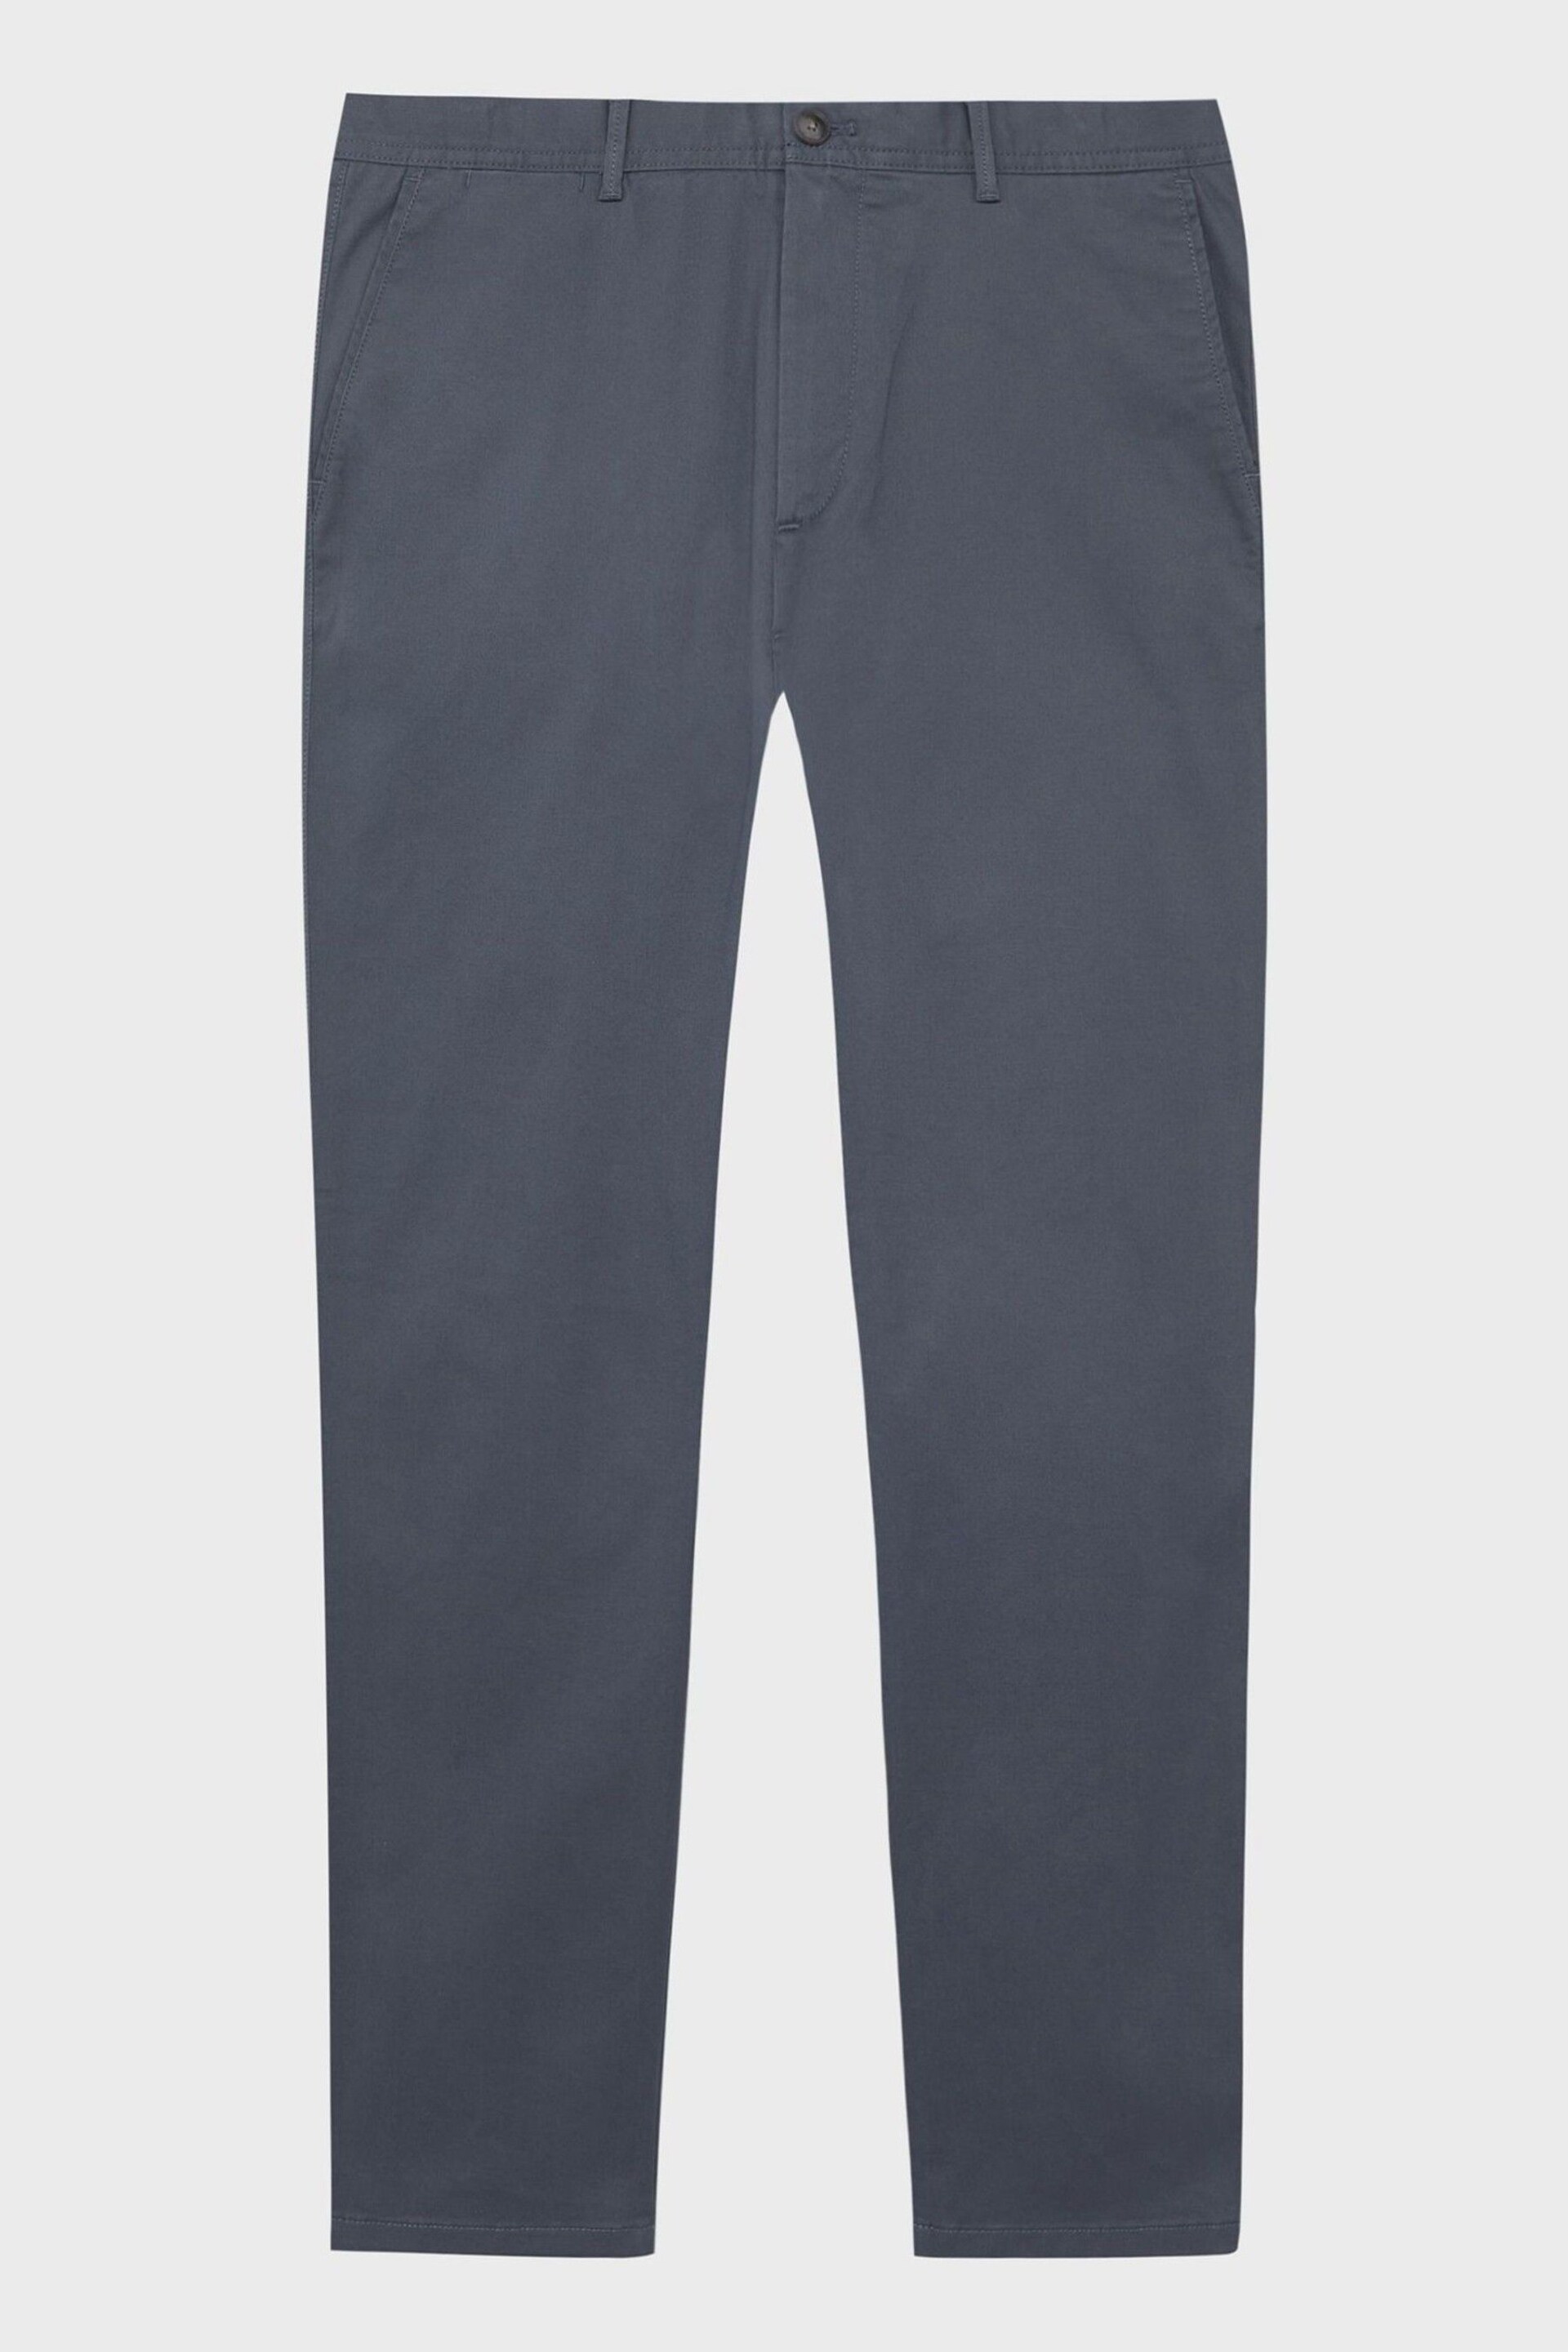 Reiss Airforce Blue Pitch Slim Fit Washed Cotton Blend Chinos - Image 2 of 6